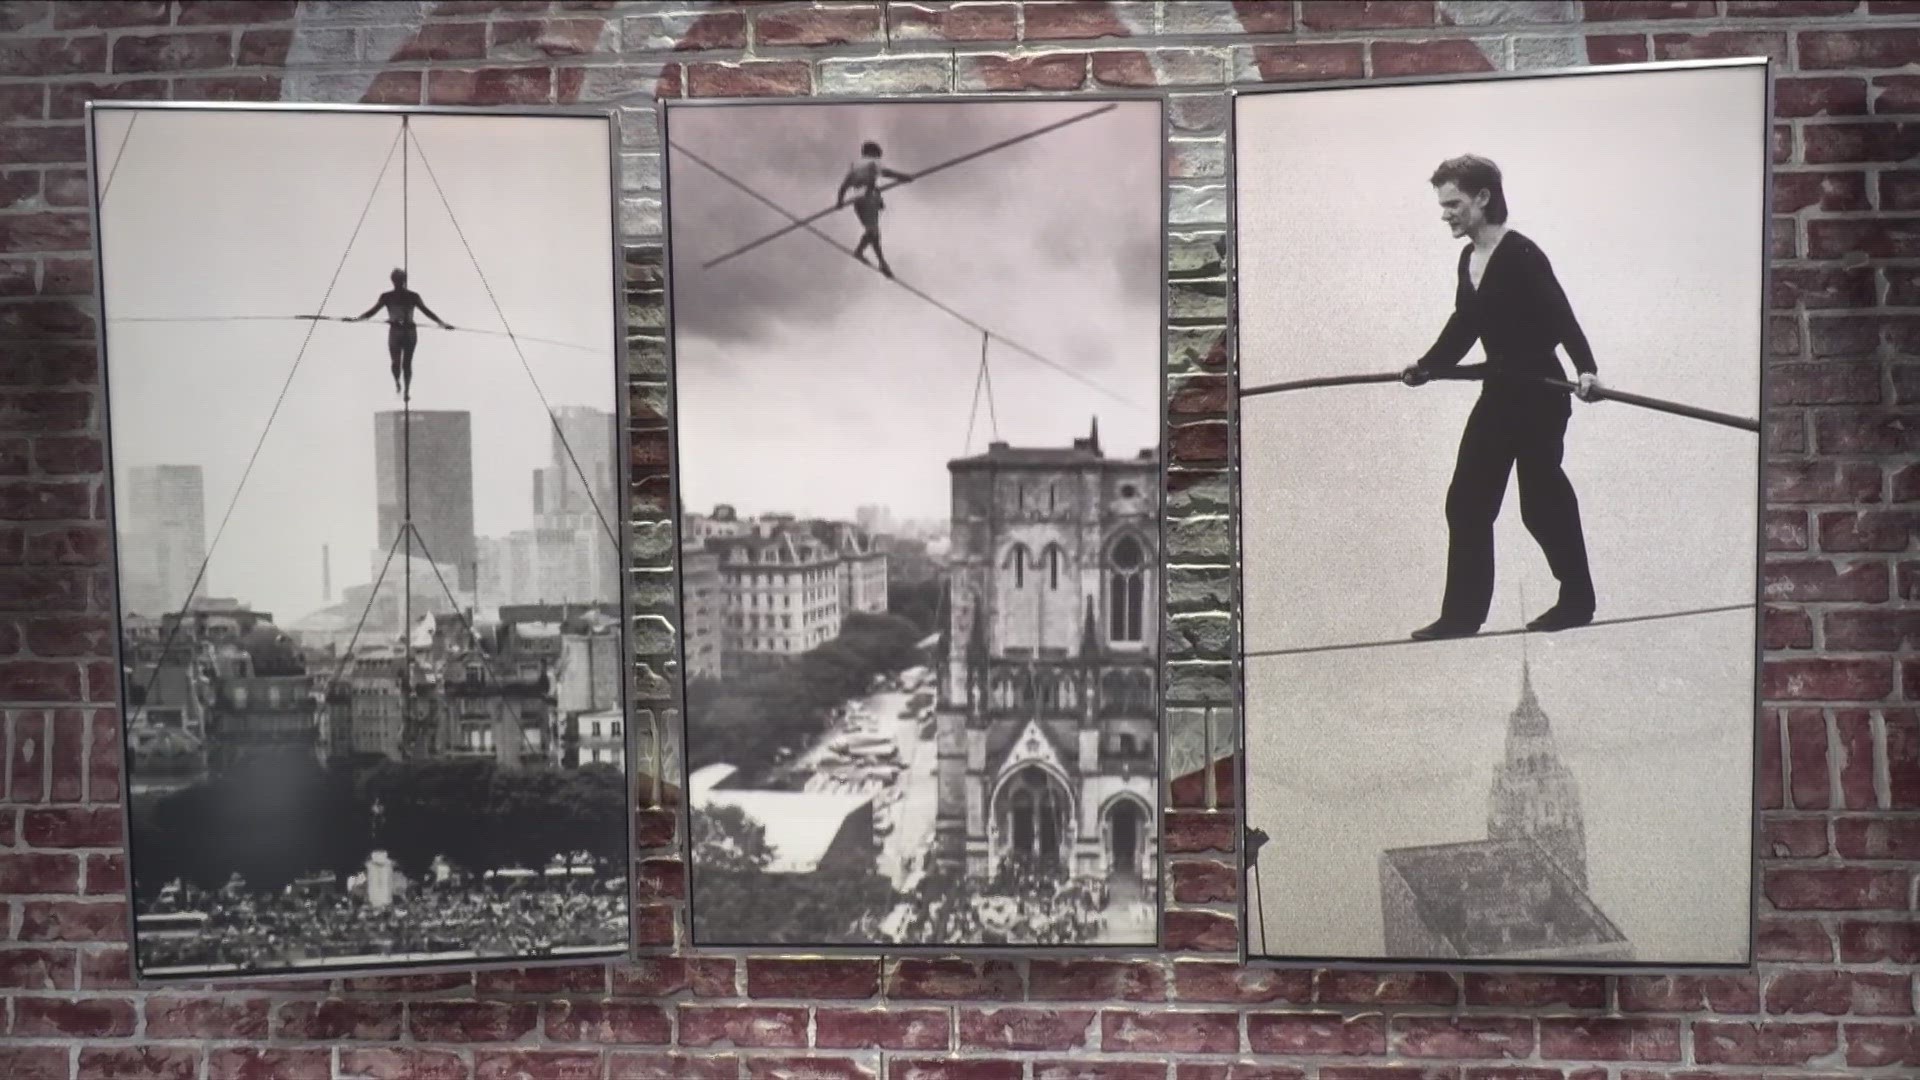 The tightrope walker once walked on a wire suspended between the Twin Towers.